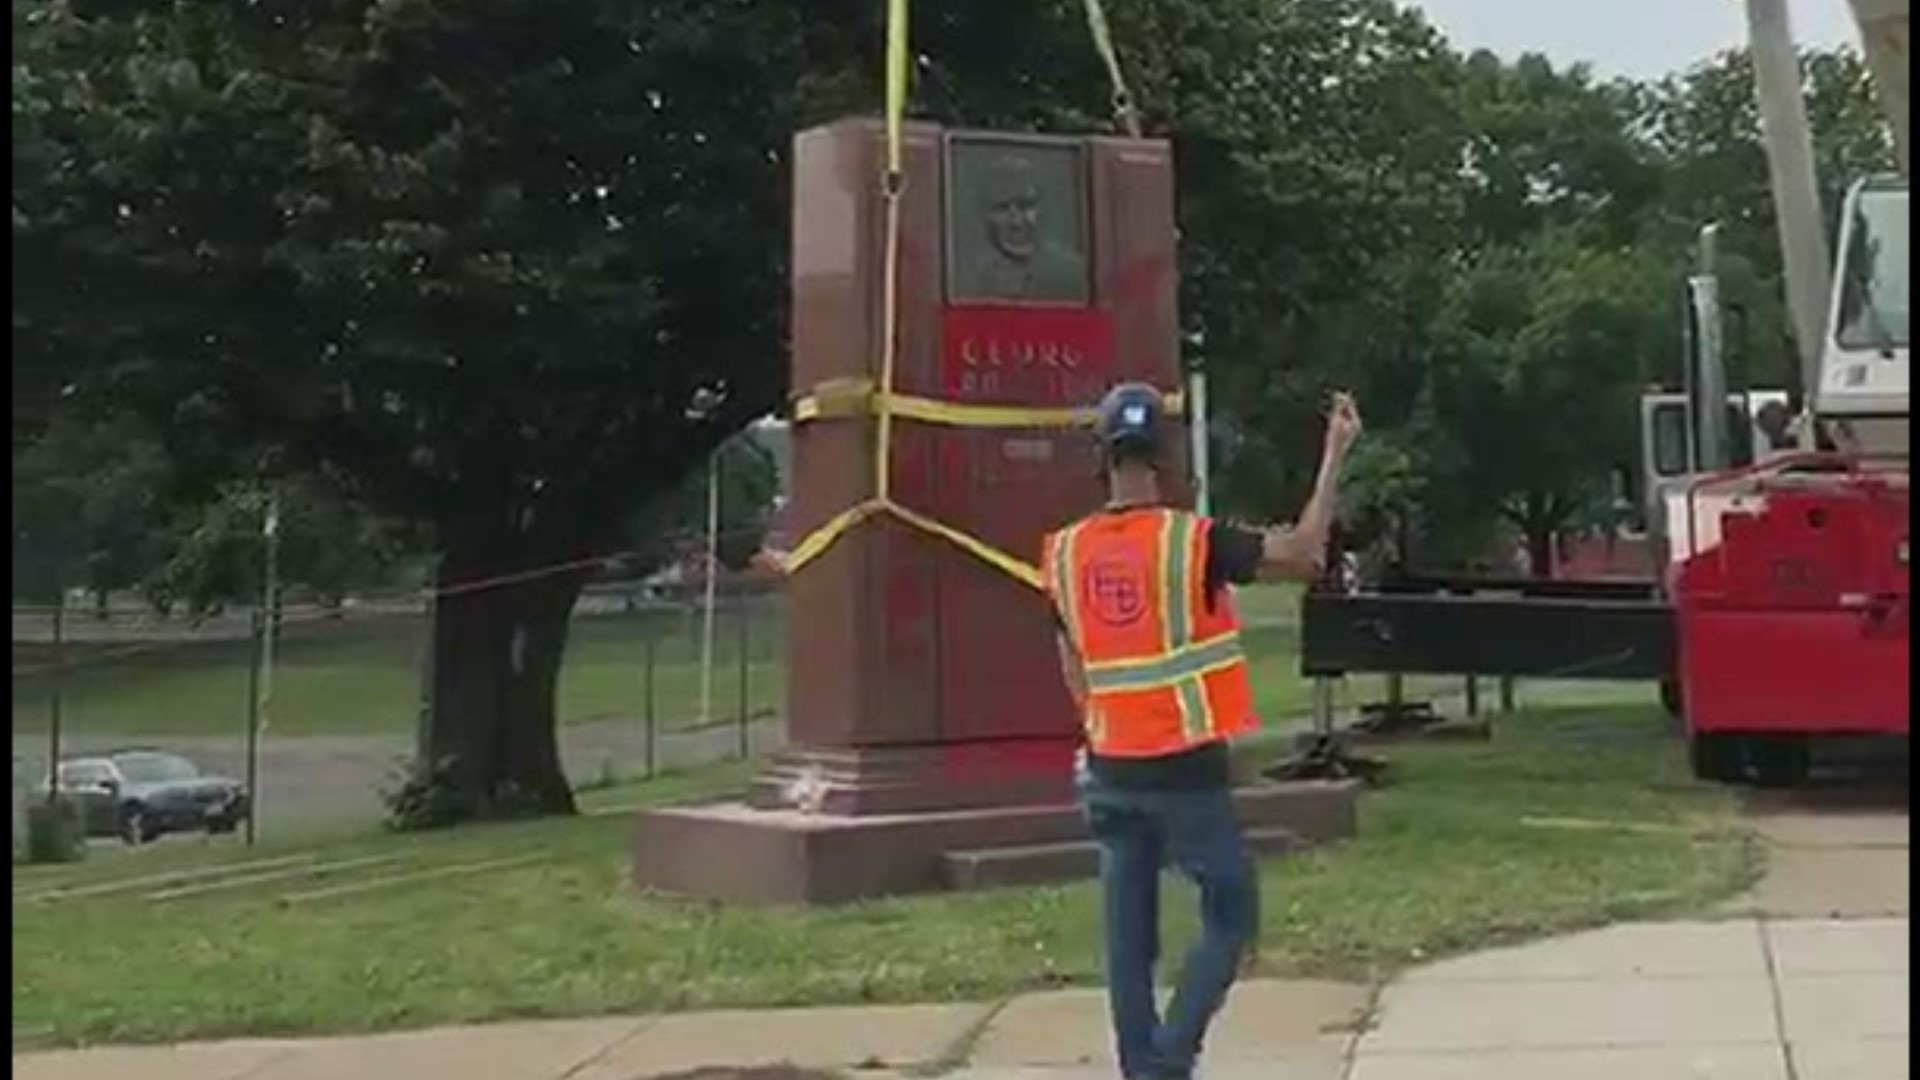 "Removing this statue is a small and an overdue step on the road to lasting equality and justice," said the Events DC officials.